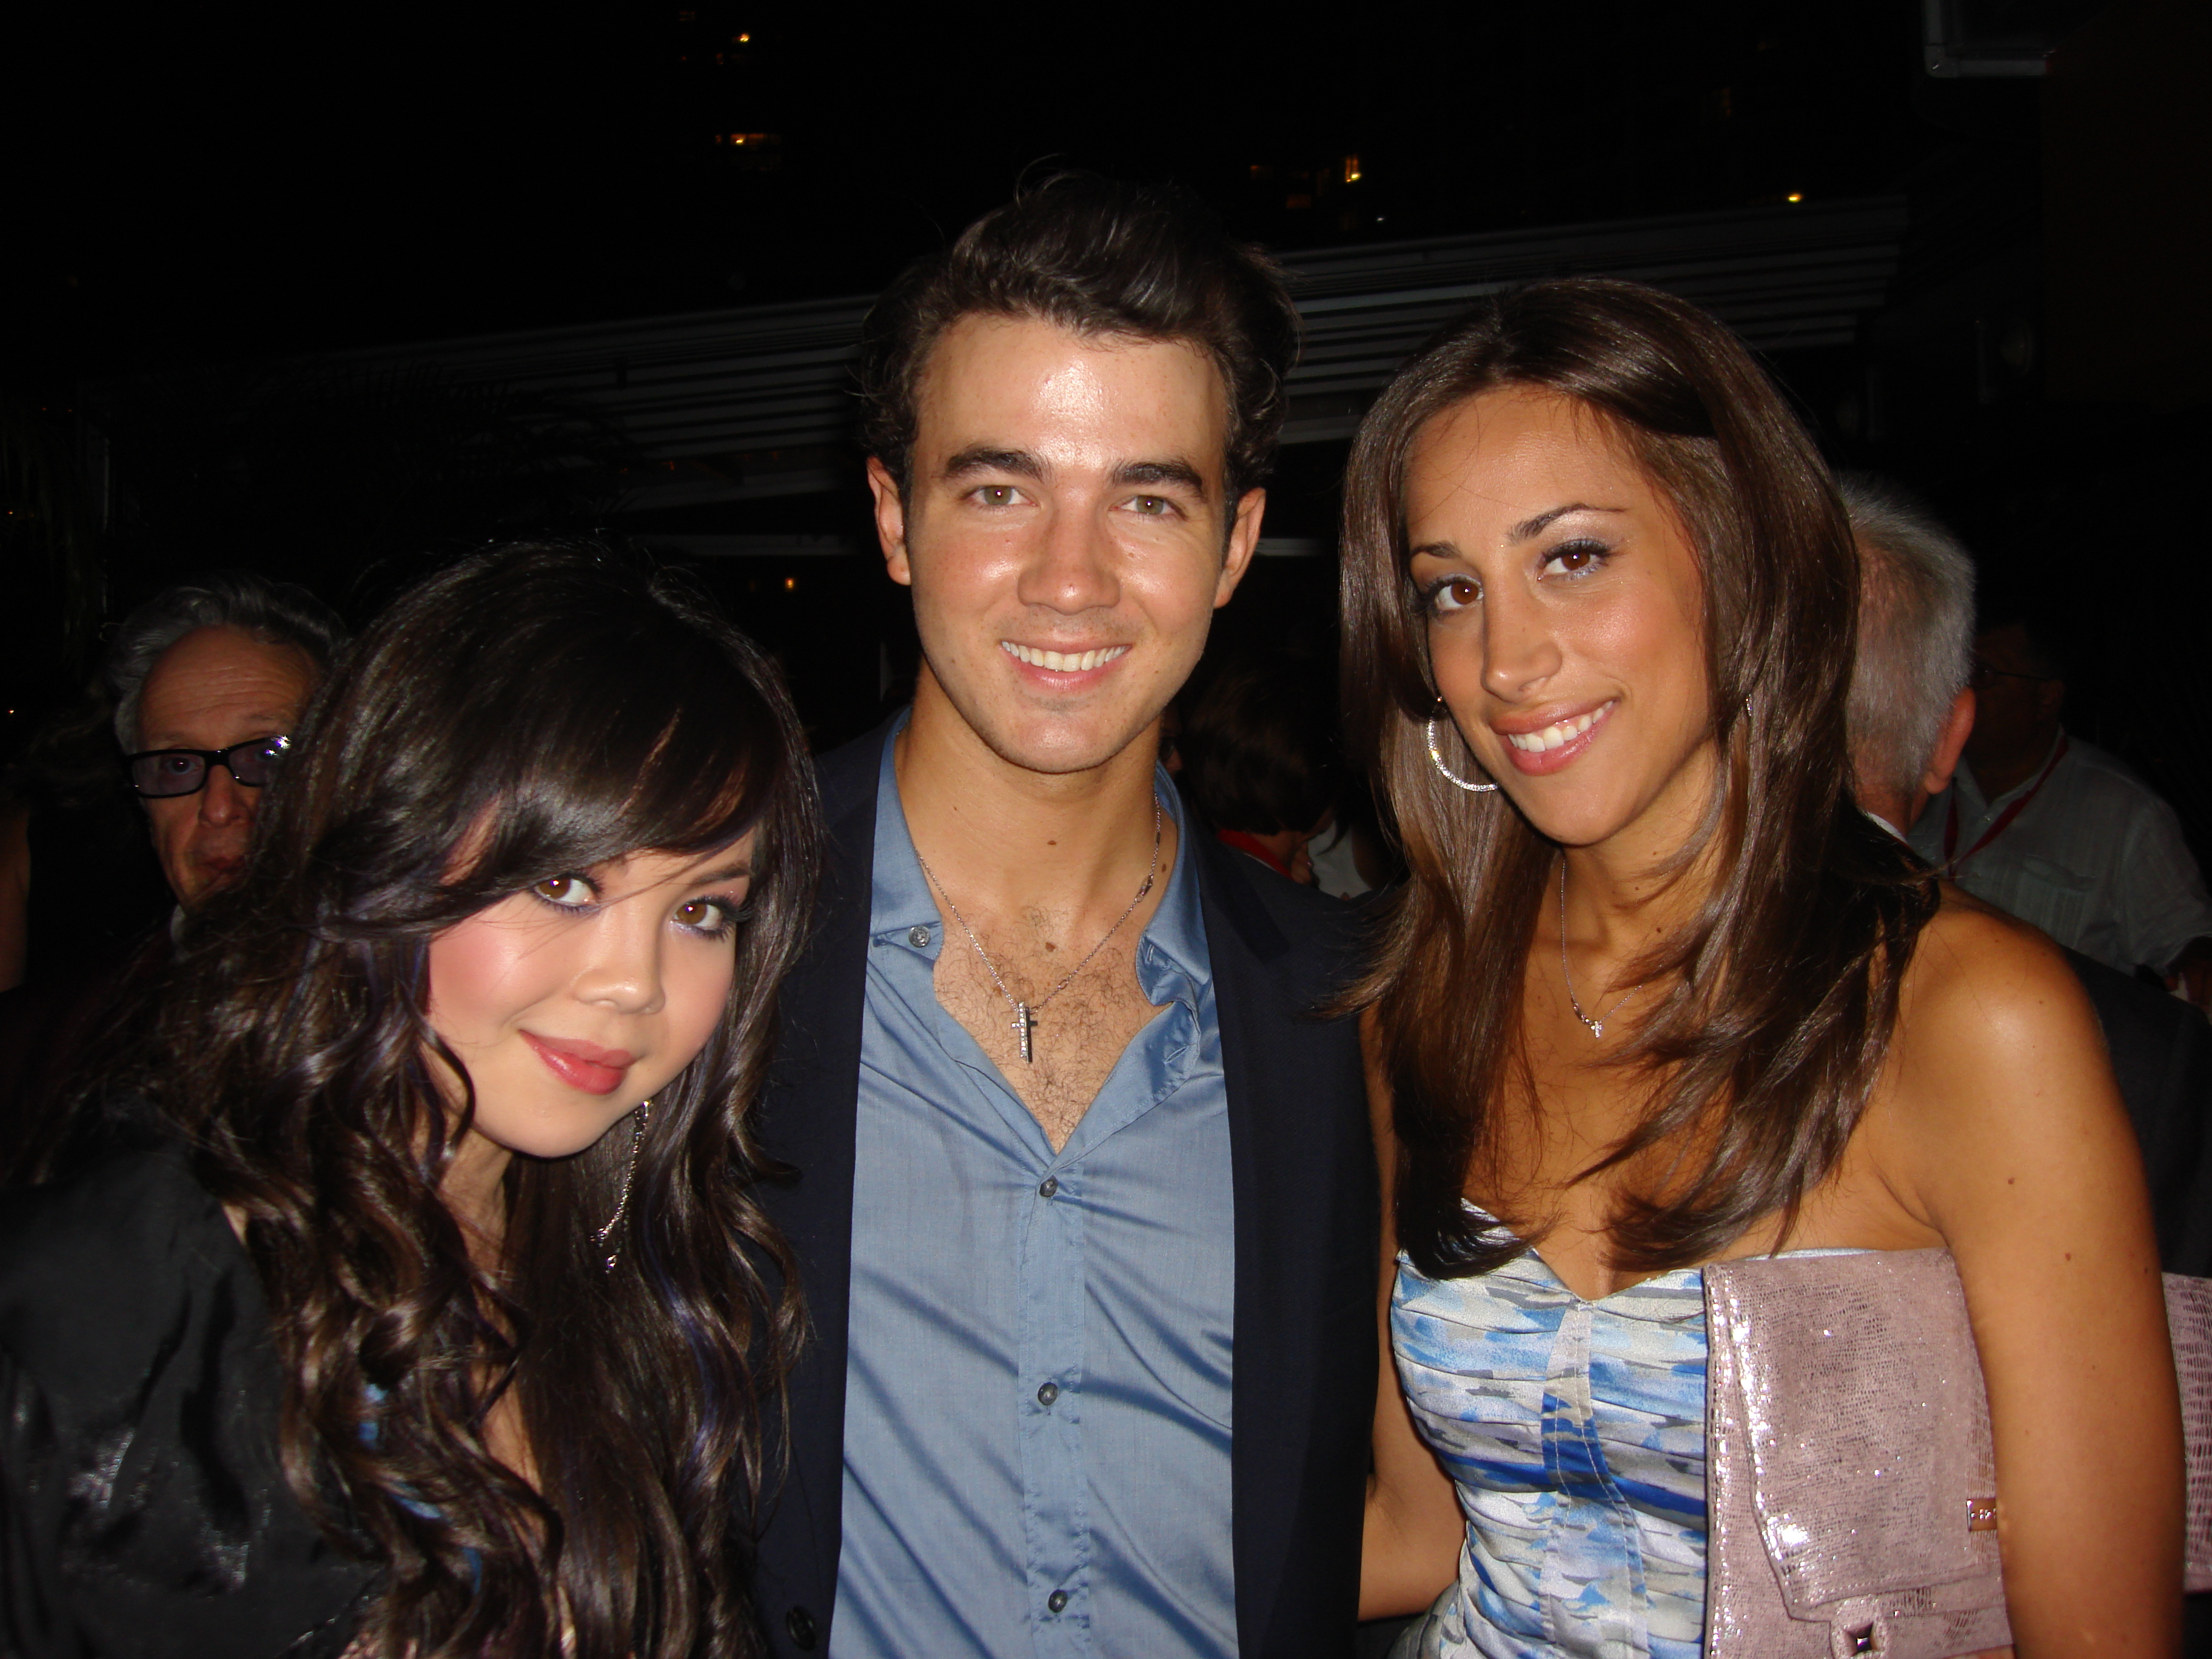 Anna Maria Perez de Tagle, Kevin Jonas, Jr. and Danielle Jonas @ The Camp Rock 2 Premiere After Party, New York, 2010